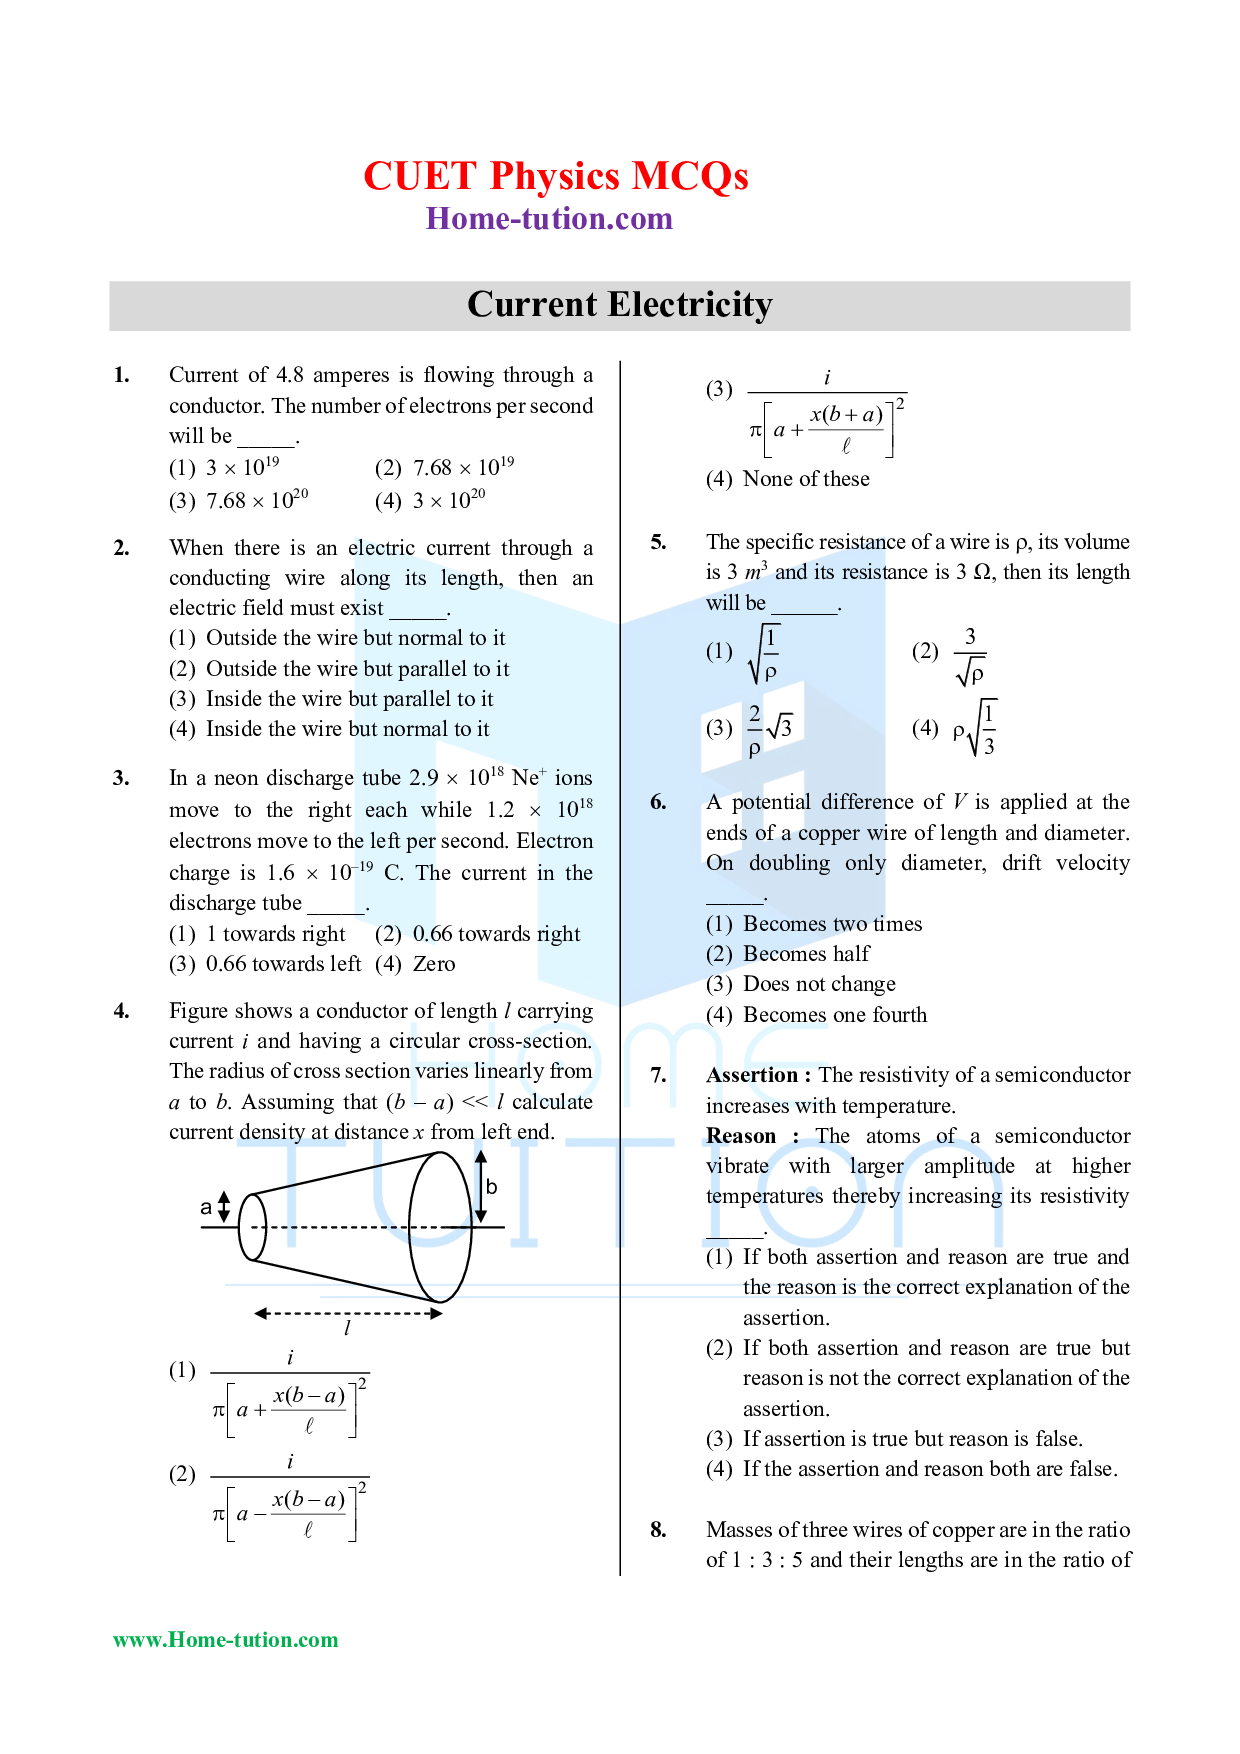 CUET MCQ Questions For Physics Chapter-03 Current Electricity